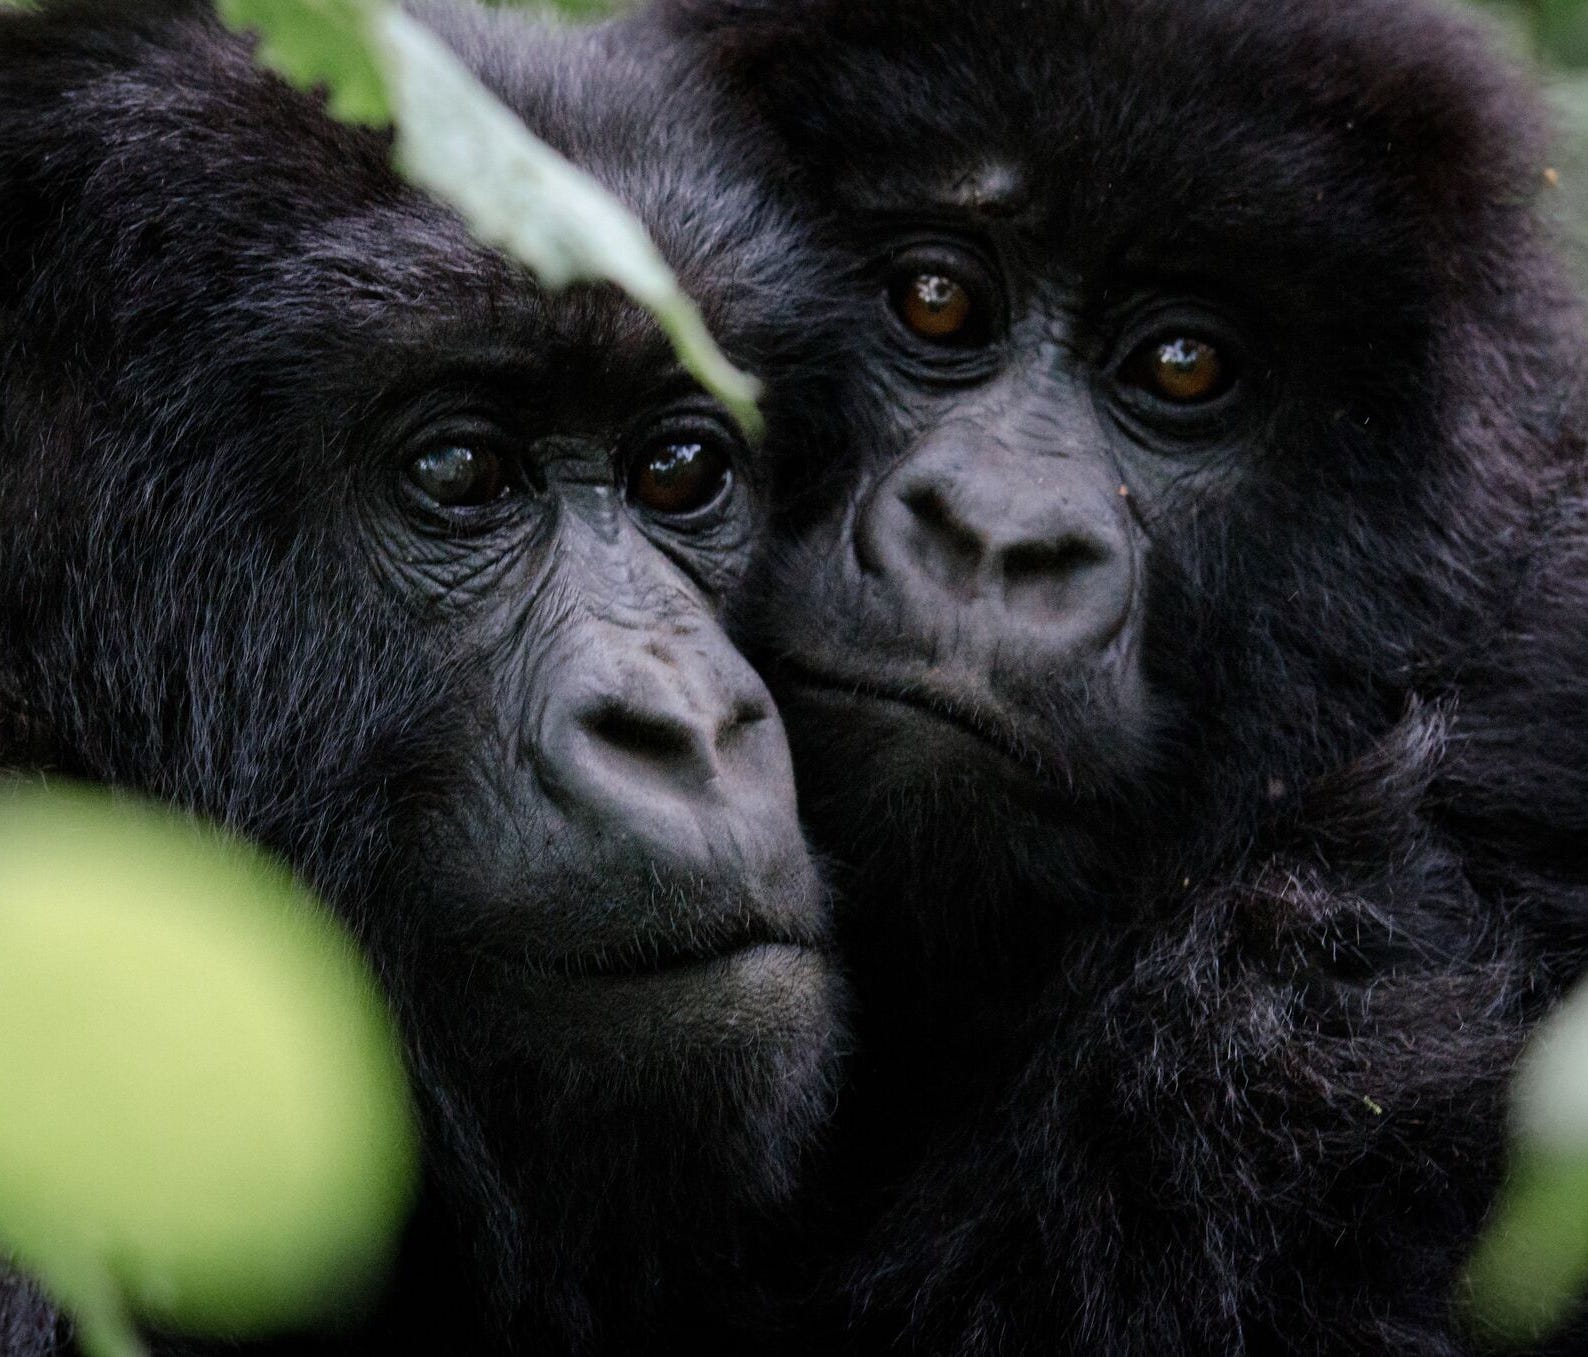 Mother gorilla with her offspring.